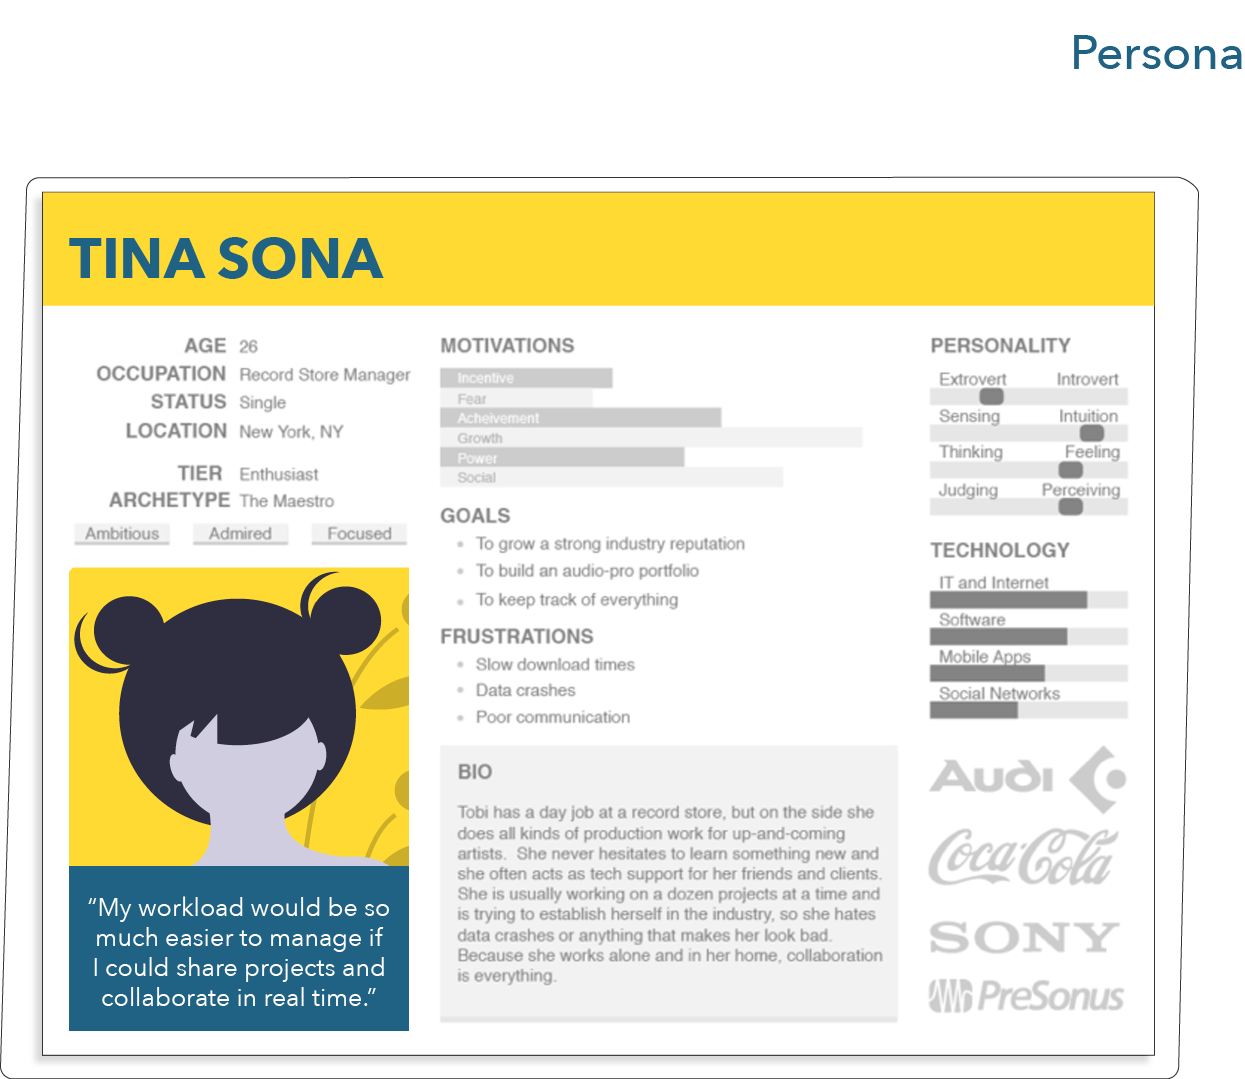 The persona card shows demographic information, motivations, goals, frustrations, personality traits, skills, a bio and a quote.